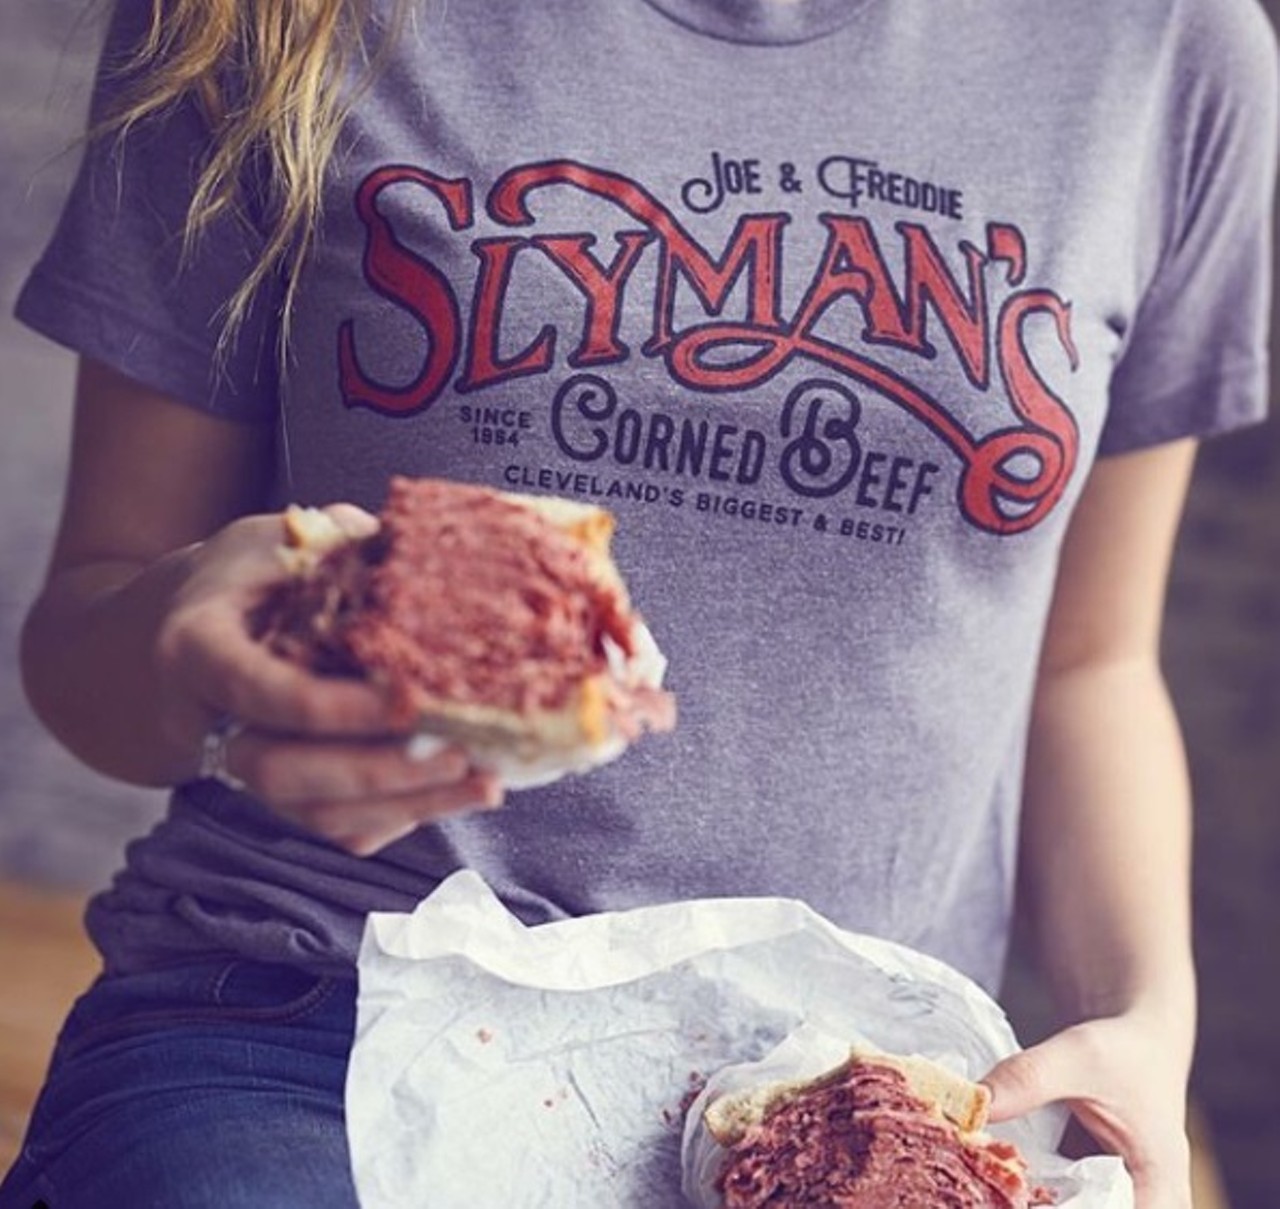  5. Slyman&#146;s Restaurant
3106 Saint Clair Ave. NE, (216) 621-3760
Choice quote: &#147;Slyman's. Dear, Slyman's. How the hell do you do it? You've managed to take a simple piece of meat, all but devoid of character, lackluster in its common nature, and you've transformed it into a work of art. If Michelangelo had chosen brisket instead of marble, this would have been David. If Shakespeare had found inspiration in ethnic deli foods, this his Romeo and Juliet.&#148; - Bob L.
Photo via cleclothingco/Instagram